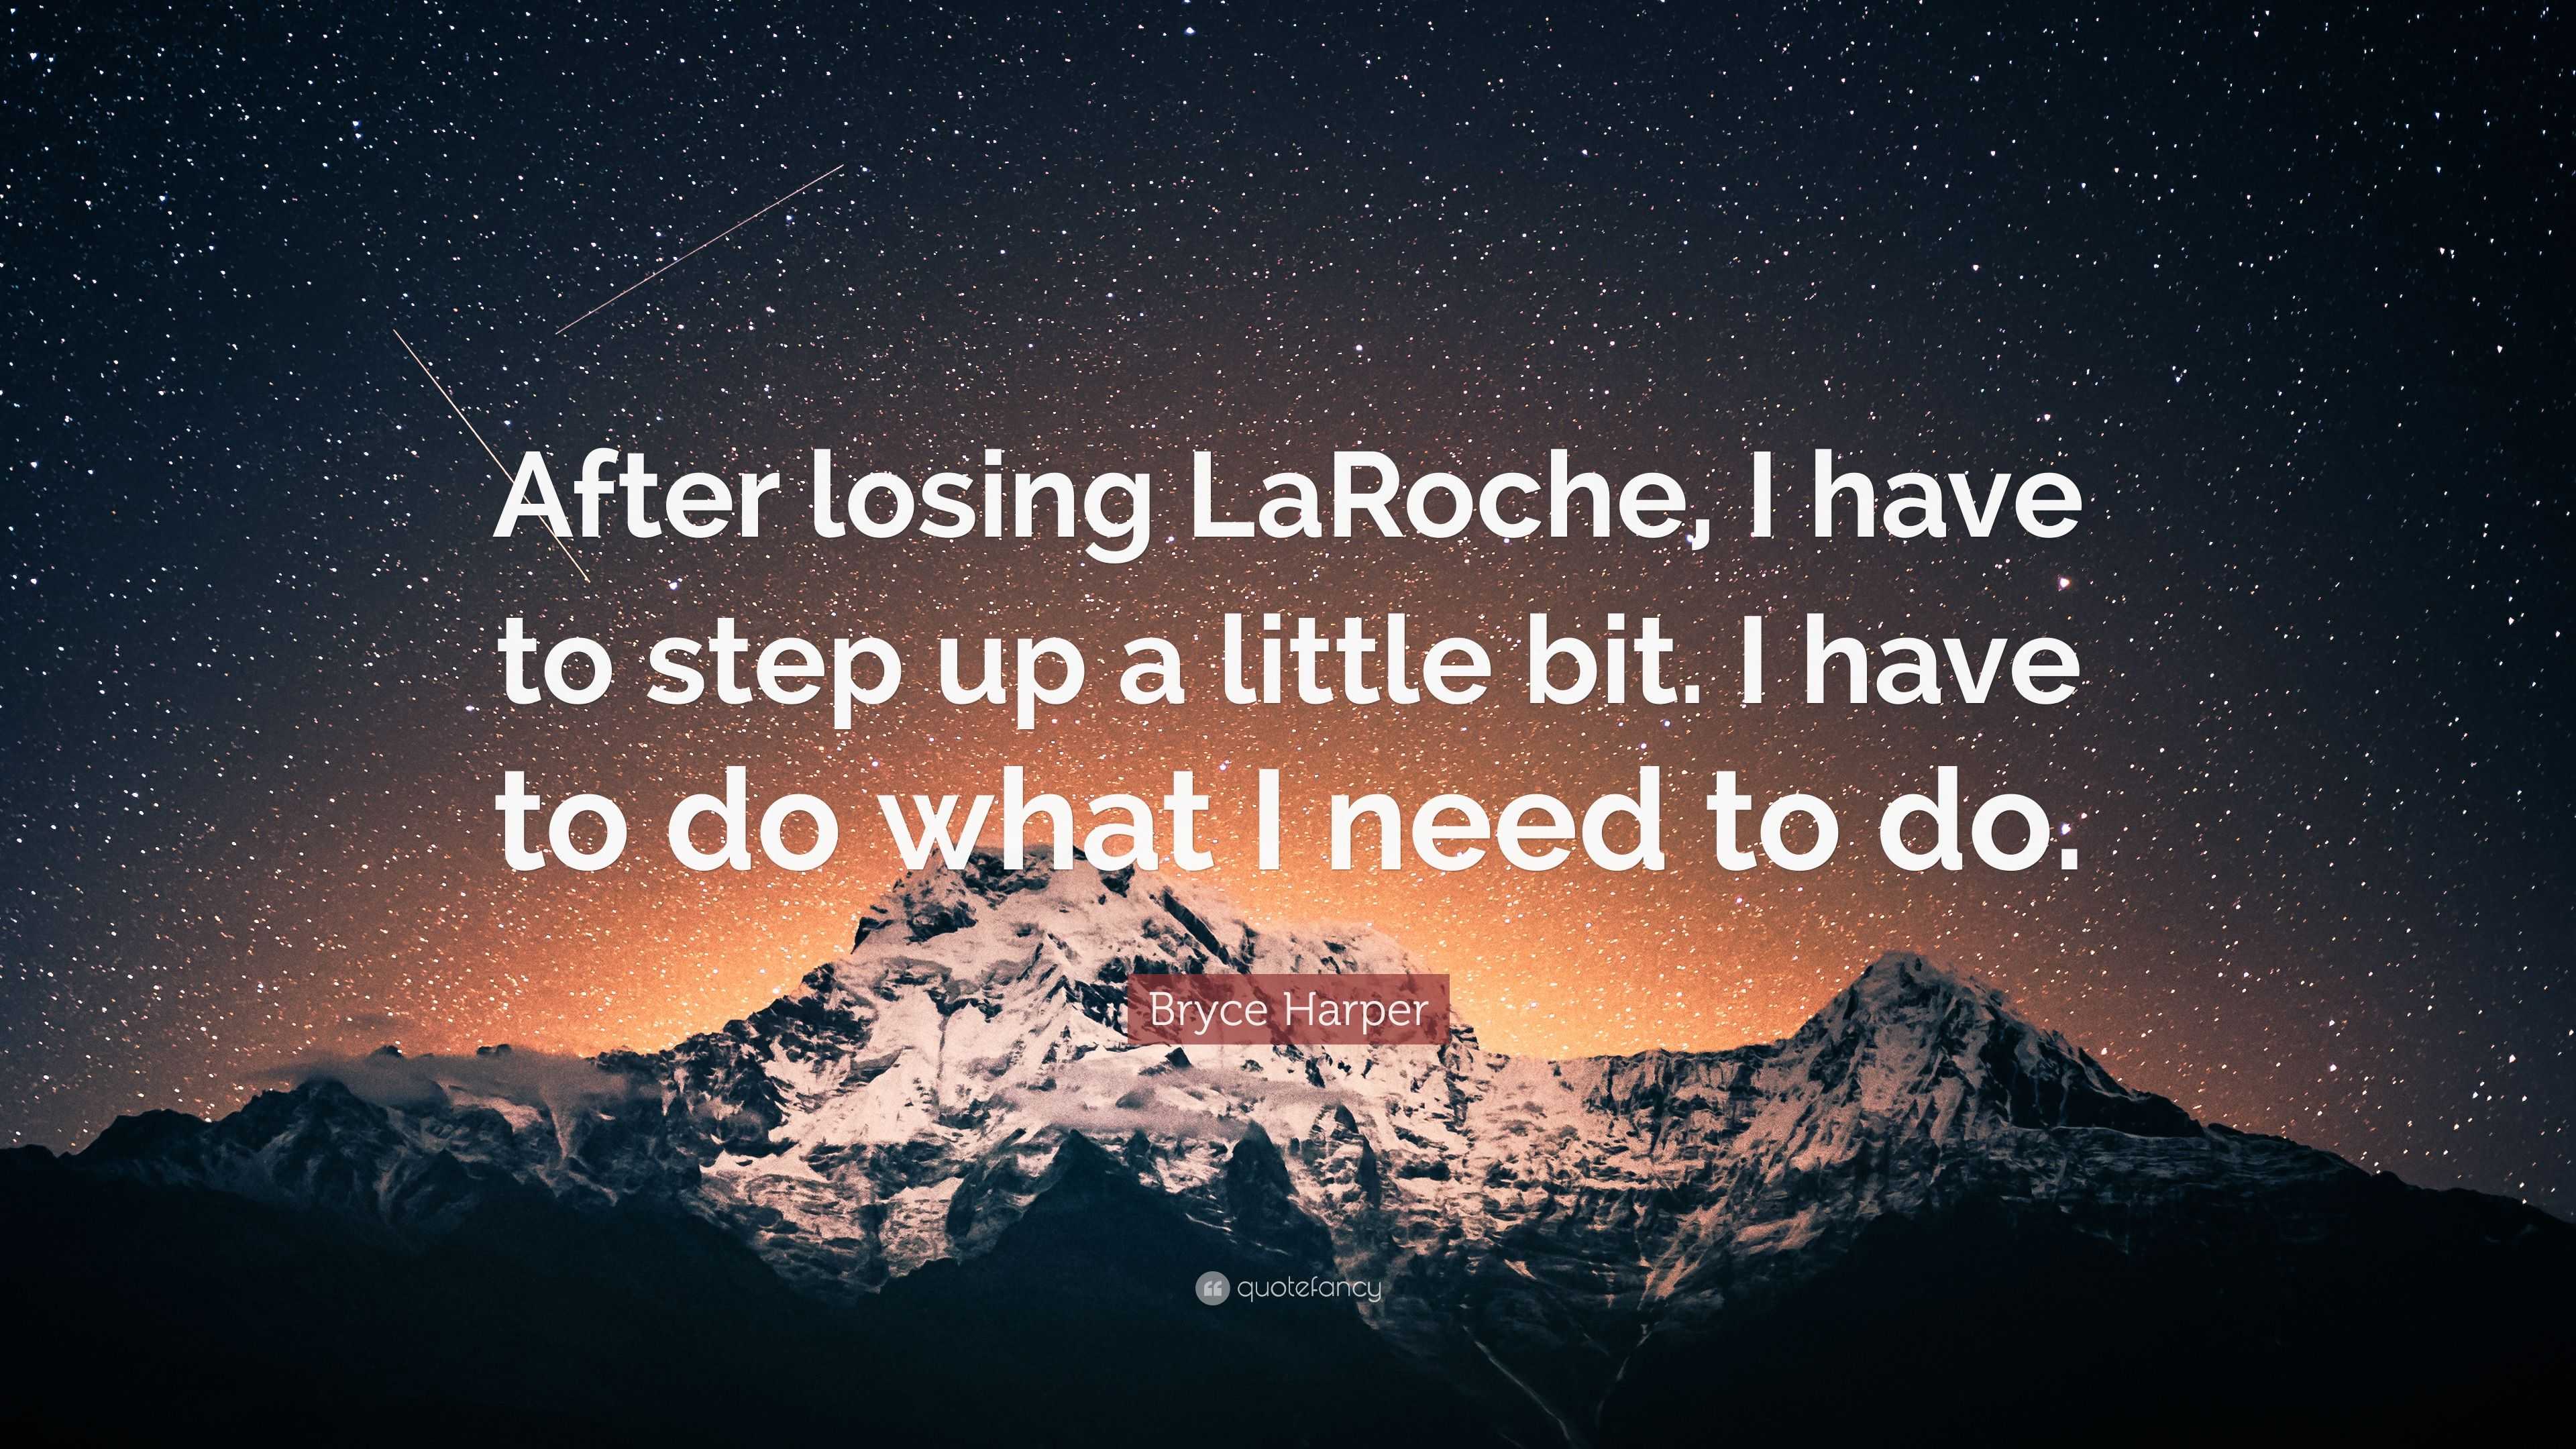 Bryce Harper Quote After Losing Laroche I Have To Step Up A Little Bit I Have